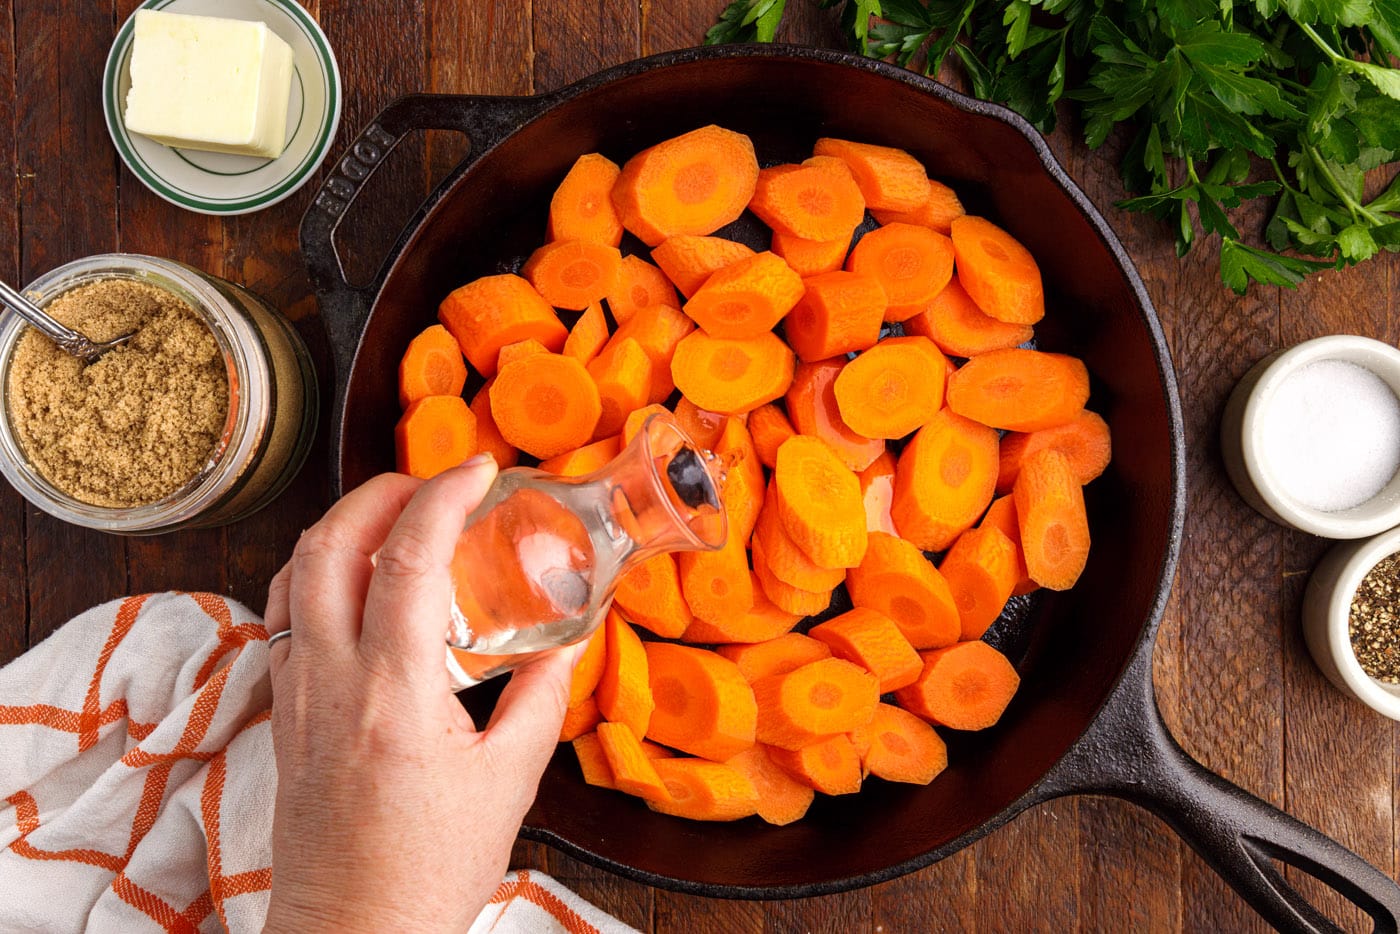 adding water to a skillet full of sliced carrots